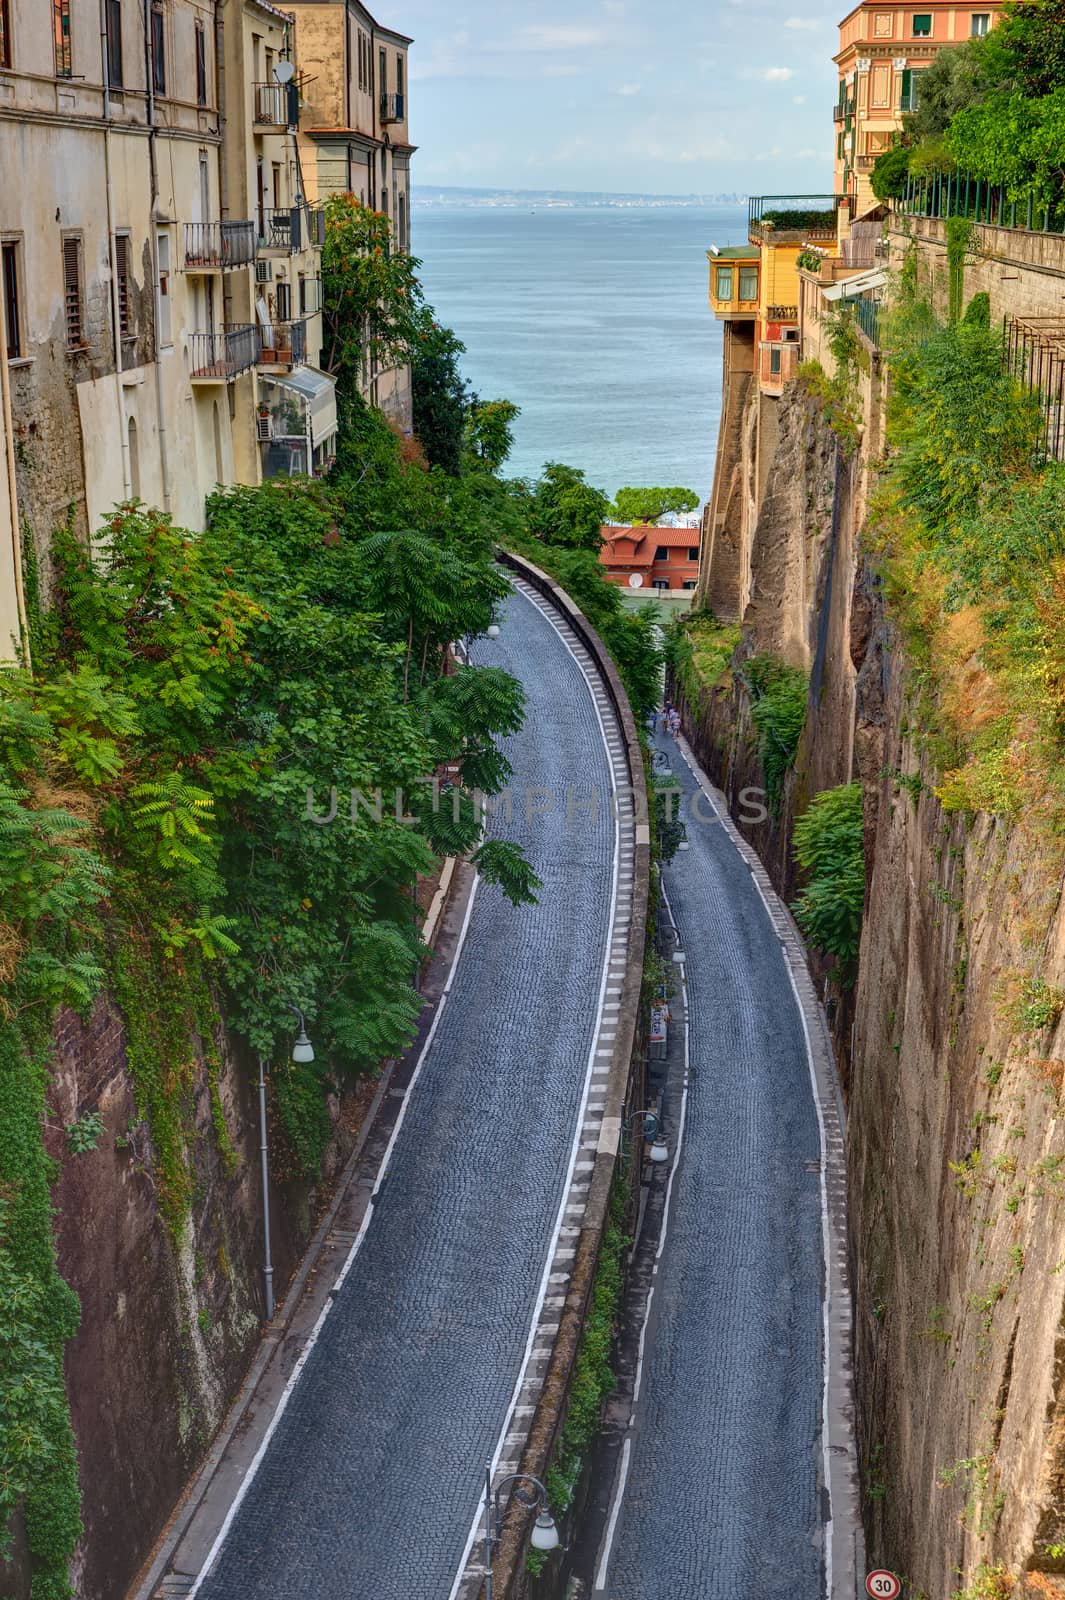 Steep gorge with road seen in Sorrento, Italy